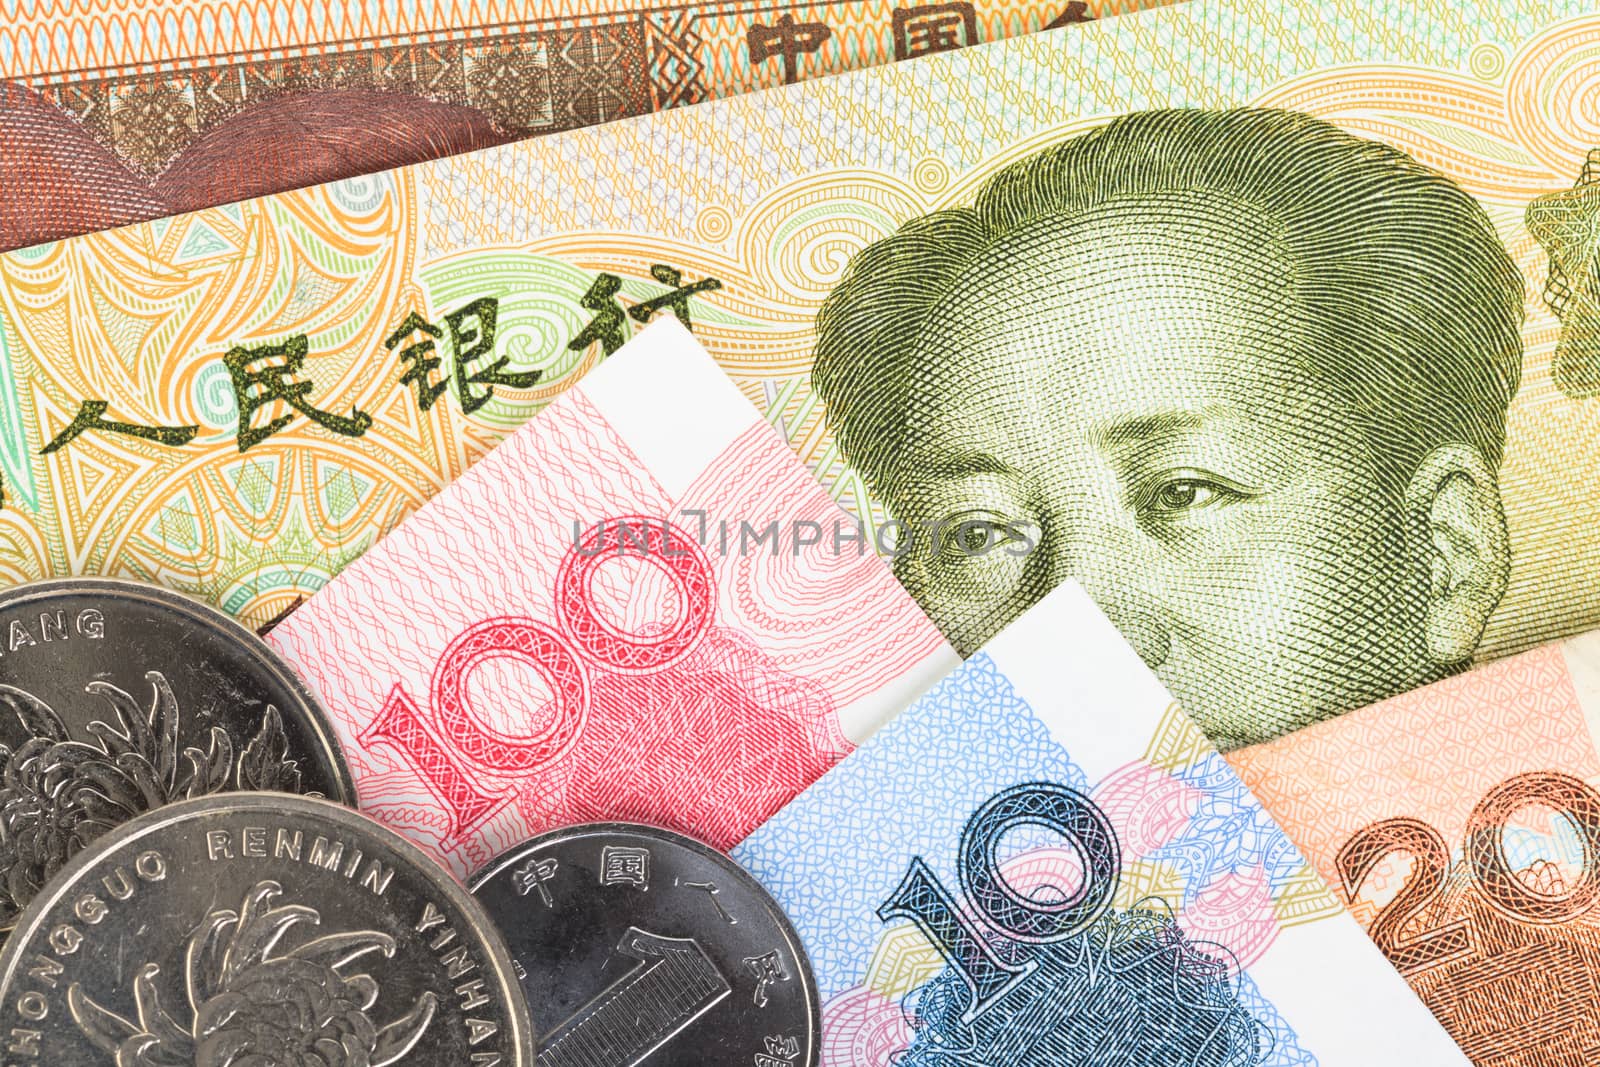 Chinese or Yuan banknotes money and coins from China's currency, by FrameAngel